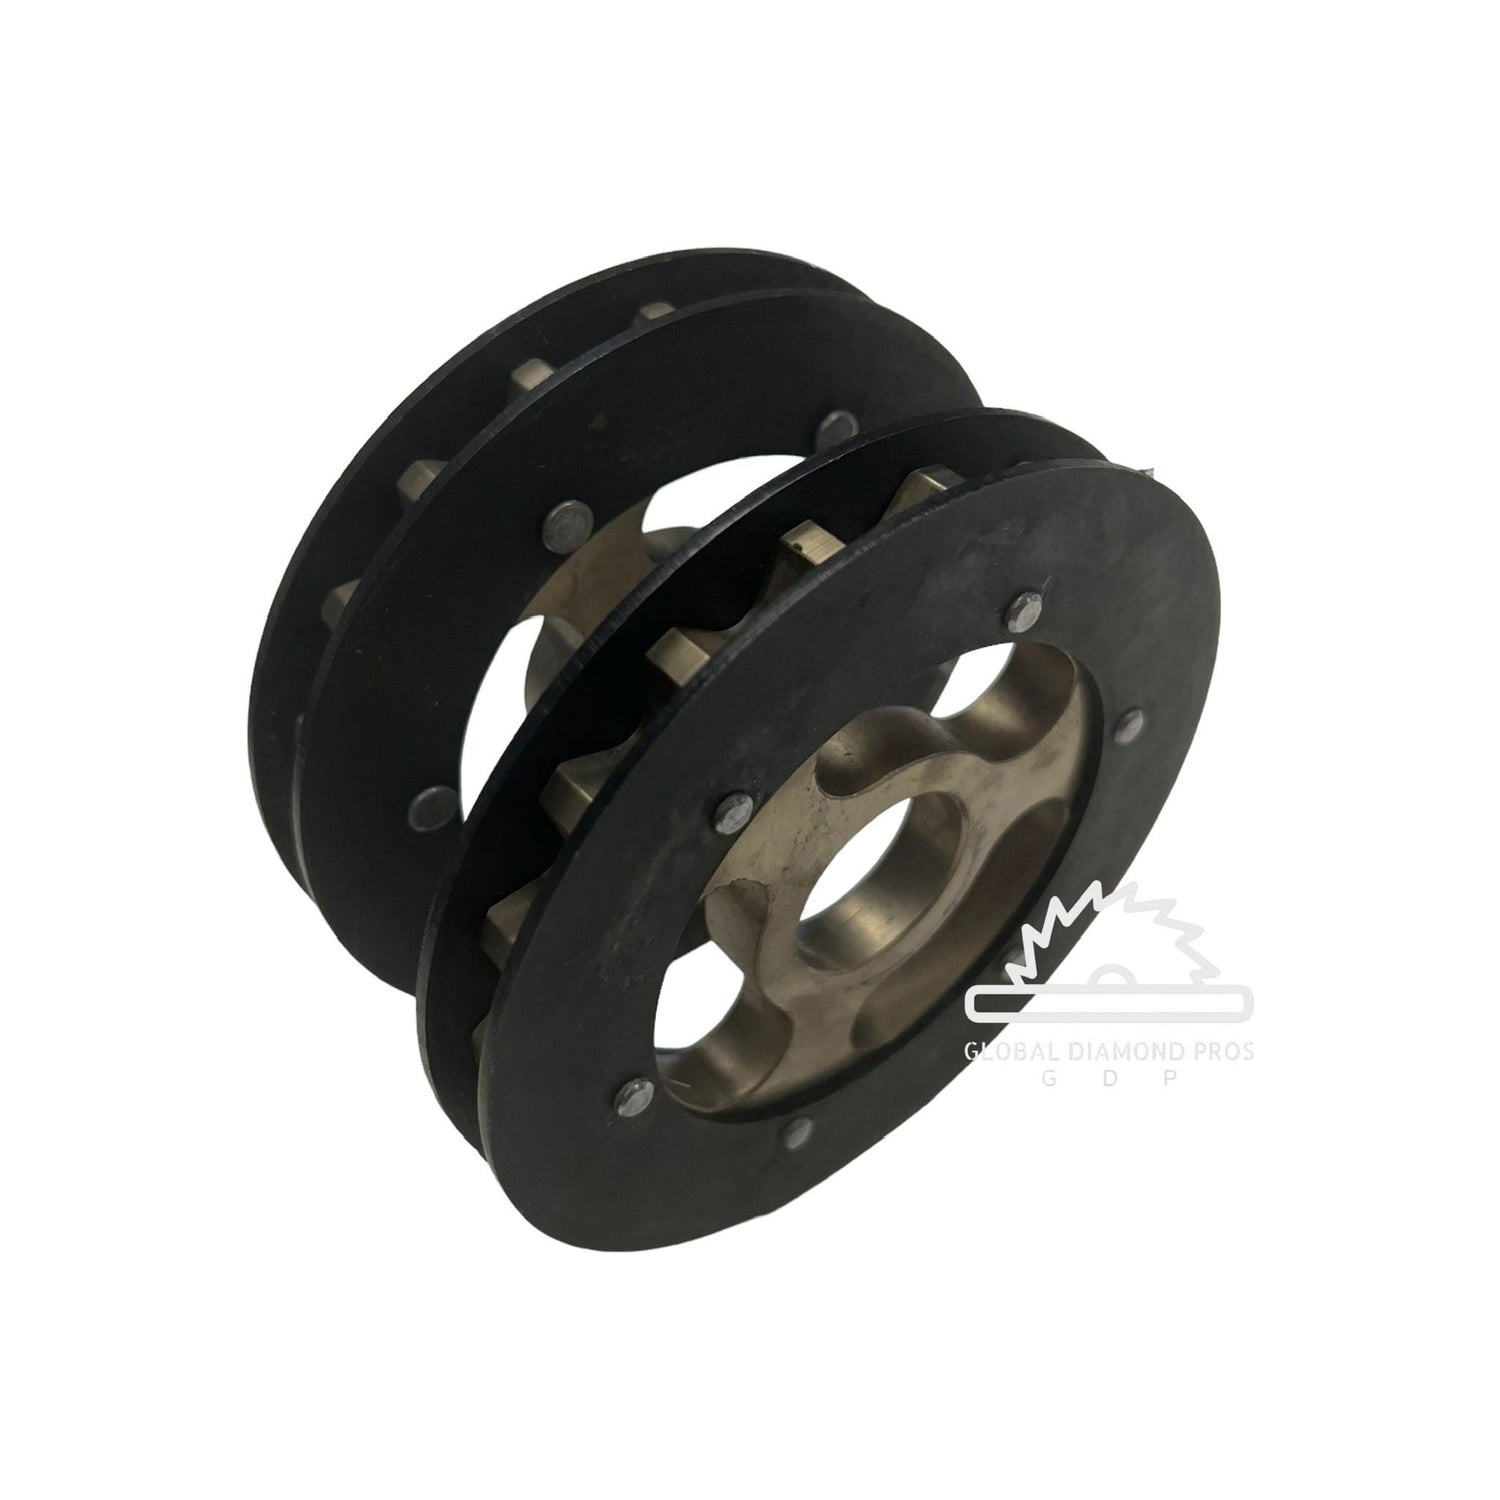 RGC C150-8 8 GPM 18-Tooth Drive Sprocket